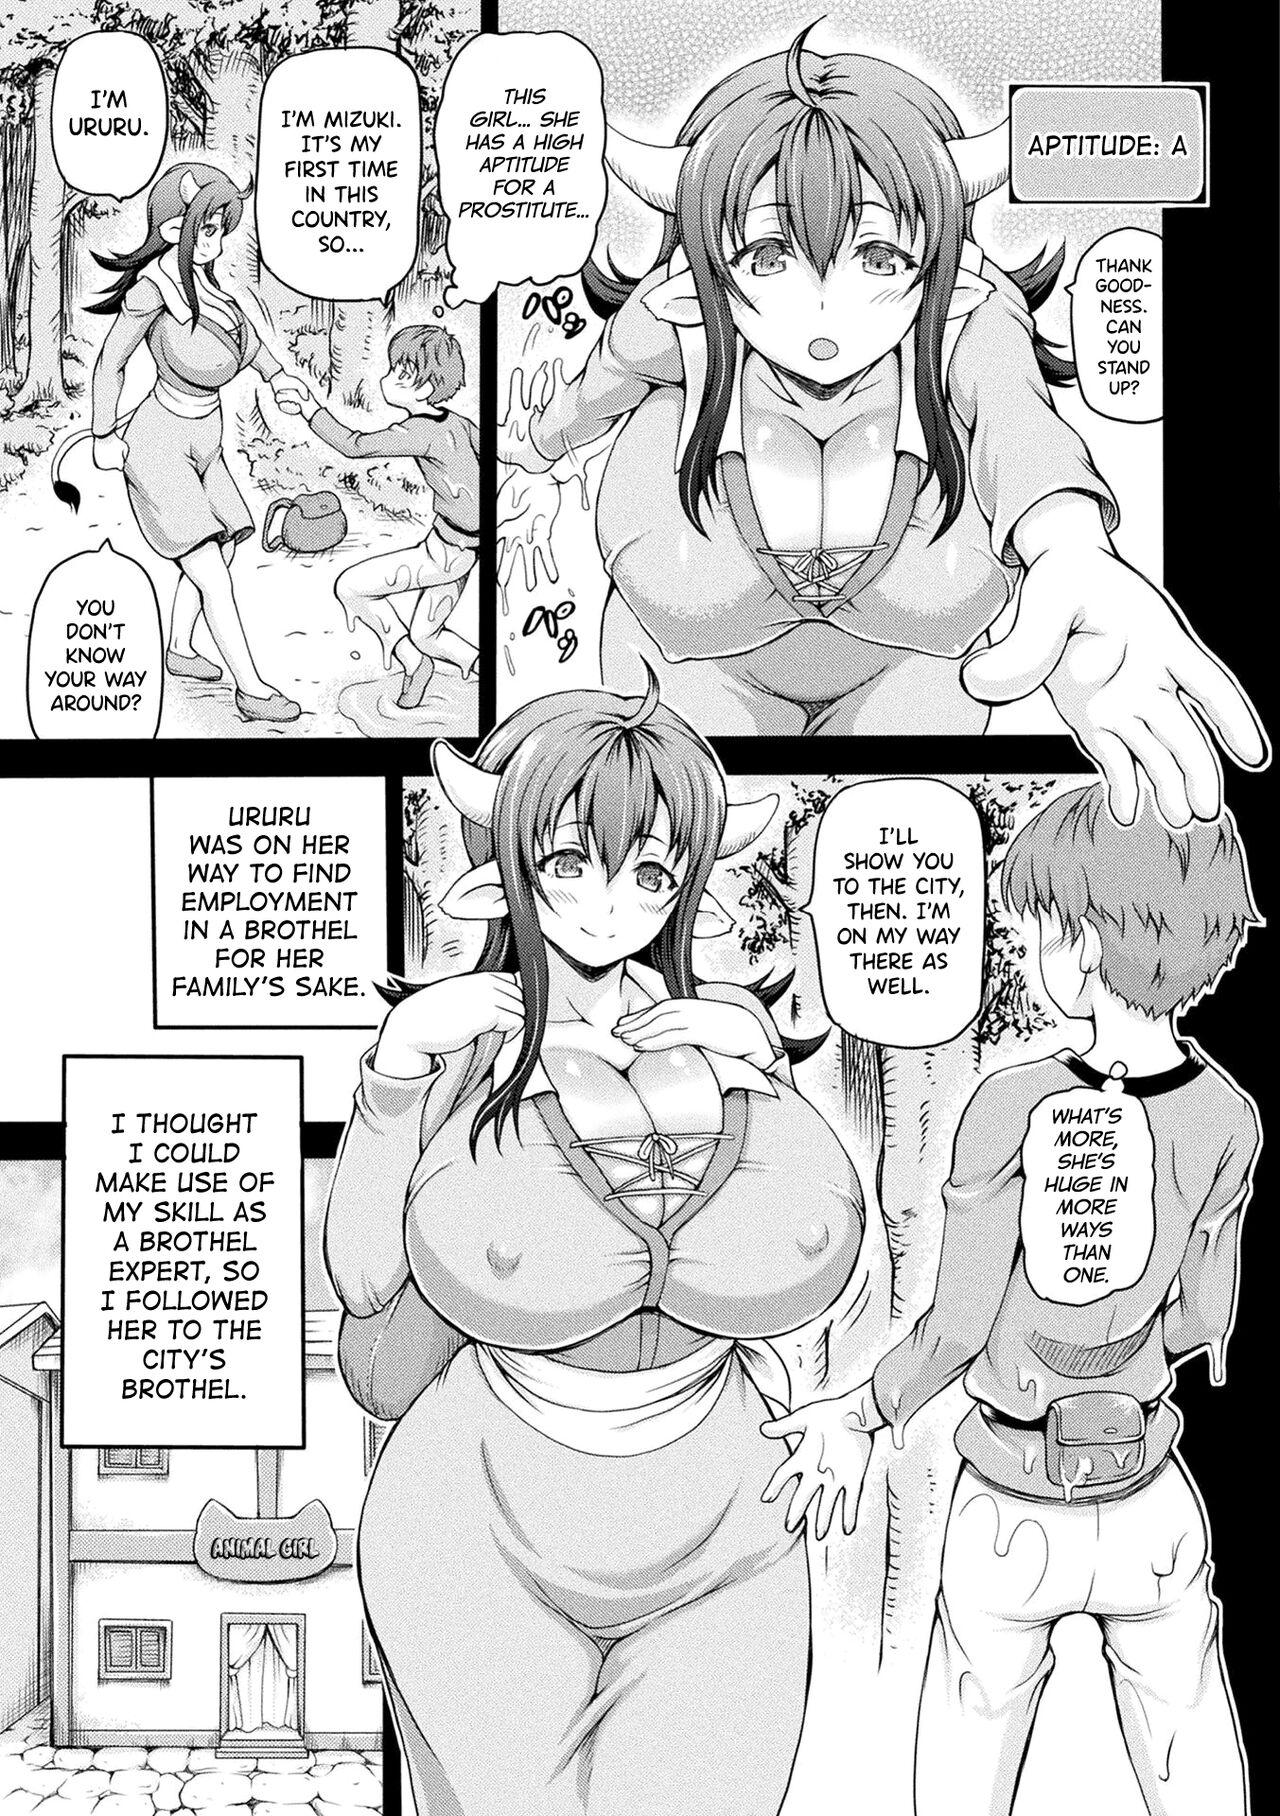 Jerking Off Isekai Shoukan Ch.1-2 Mexicano - Page 3